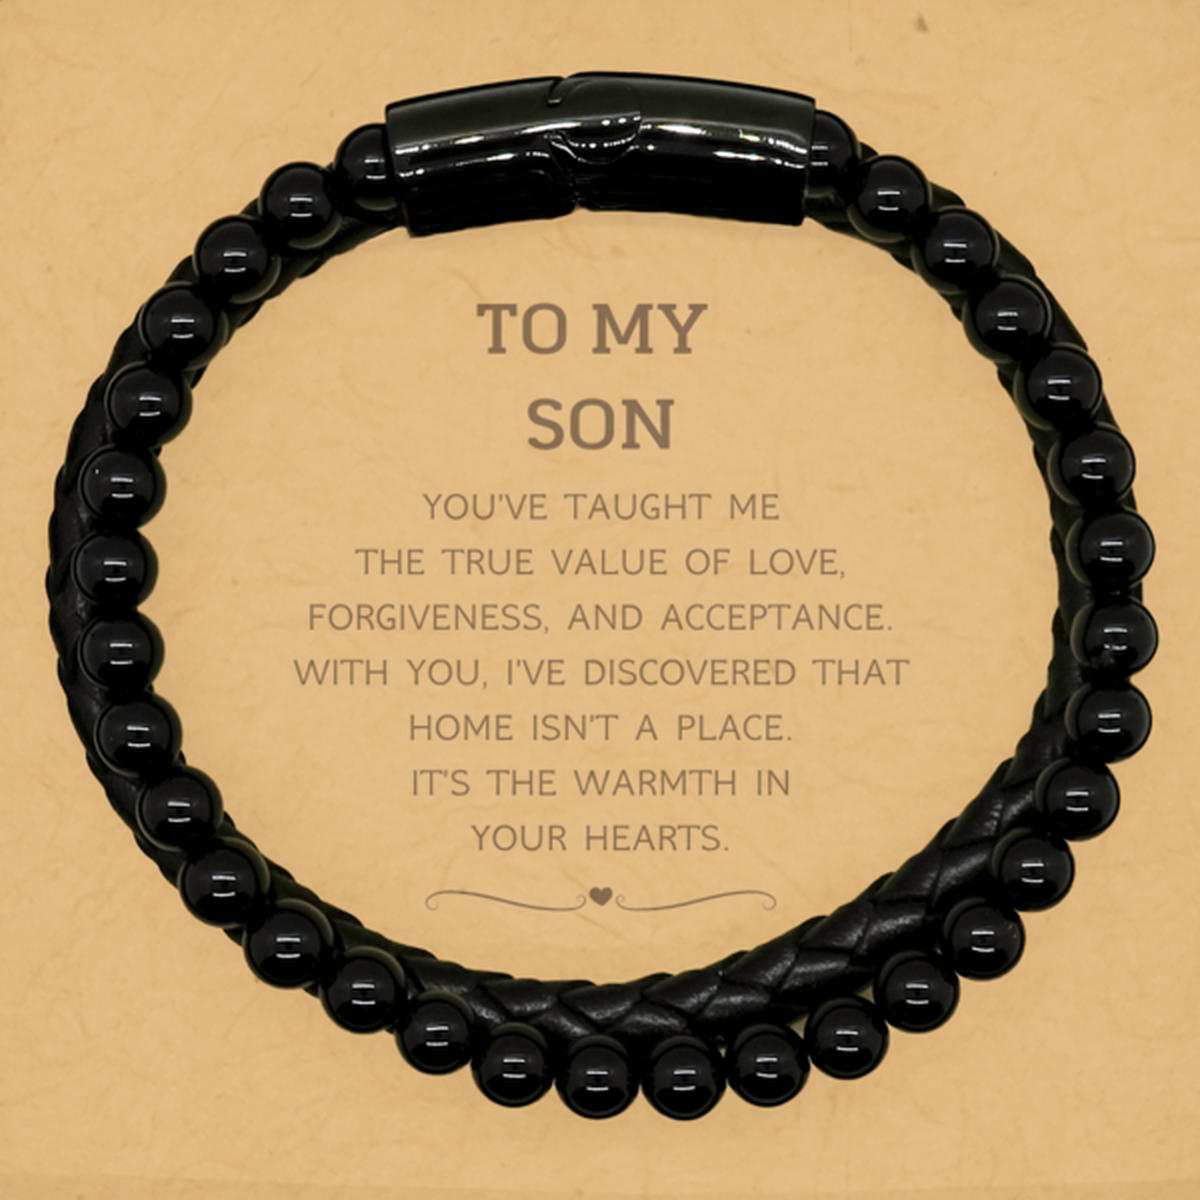 To My Son Gifts, You've taught me the true value of love, Thank You Gifts For Son, Birthday Stone Leather Bracelets For Son